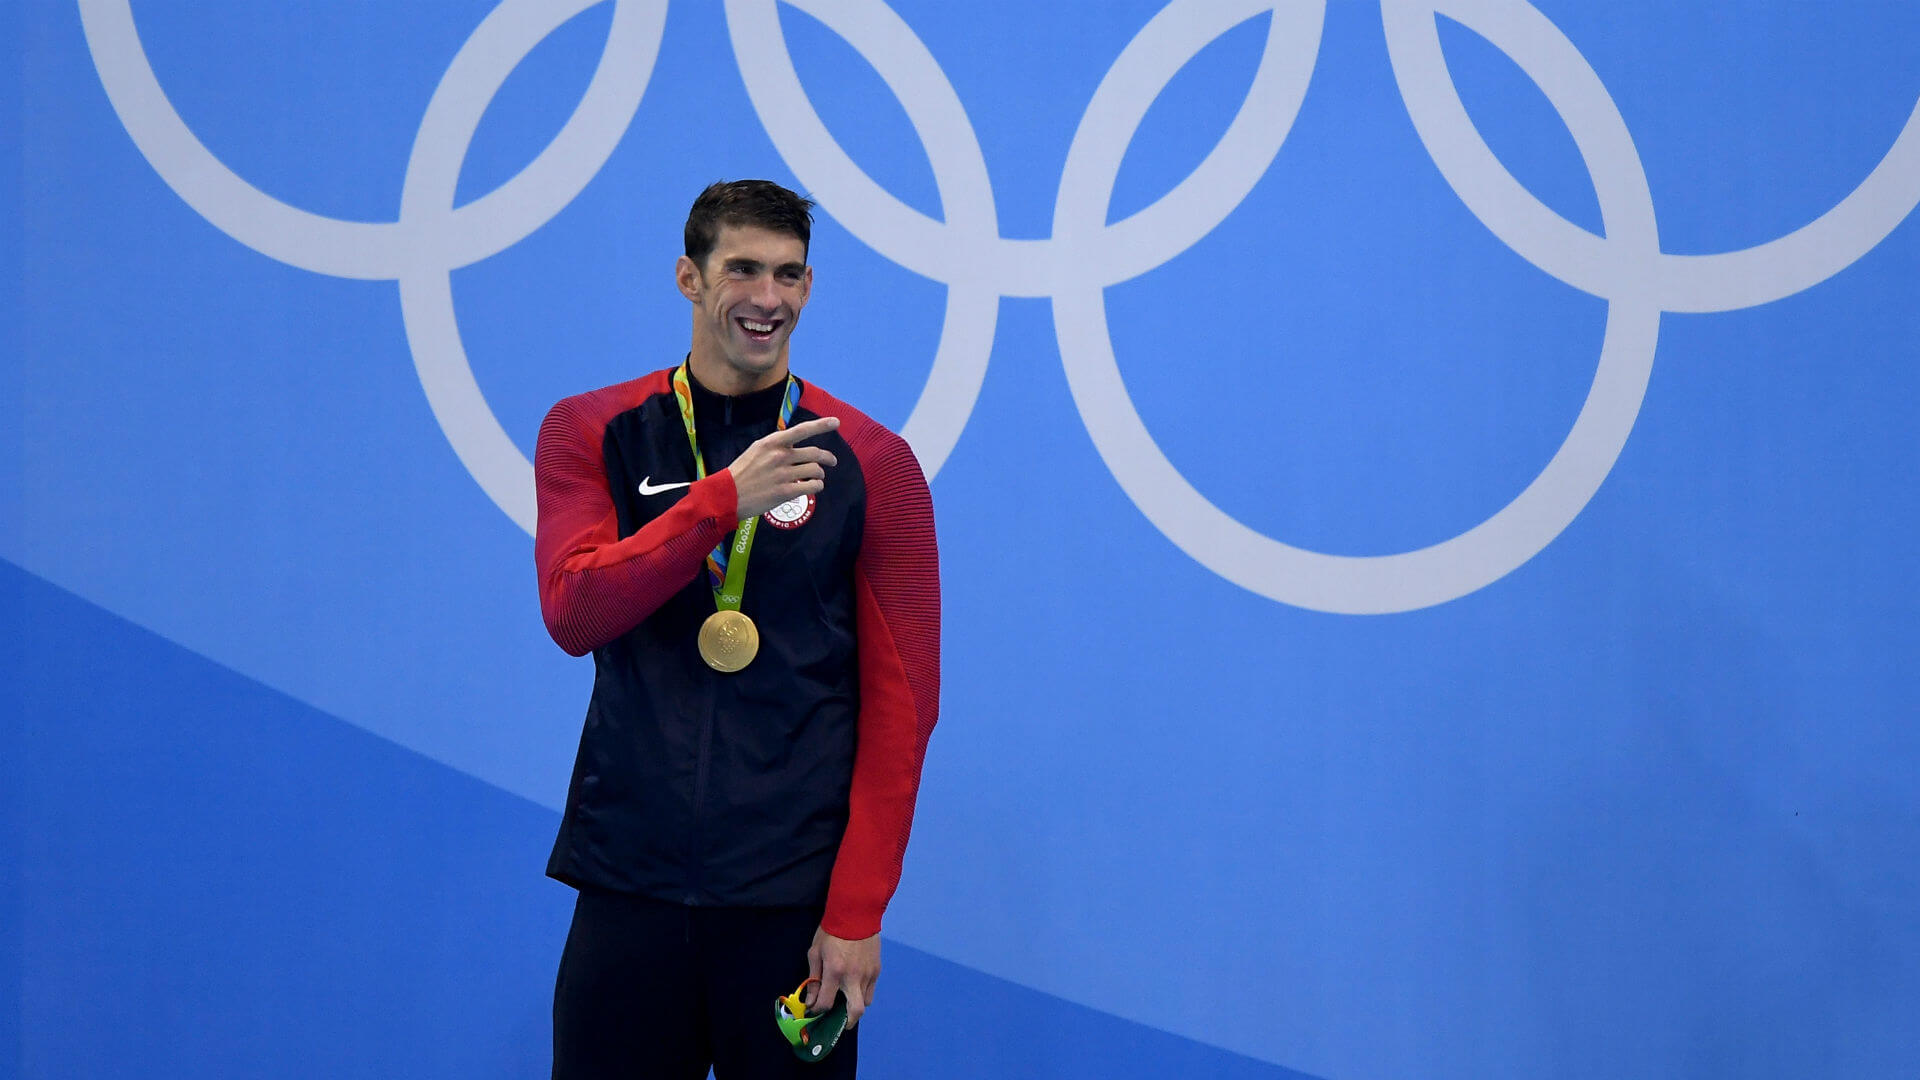 Salute to 2016 Olympics, Michael Phelps & What’s Next…